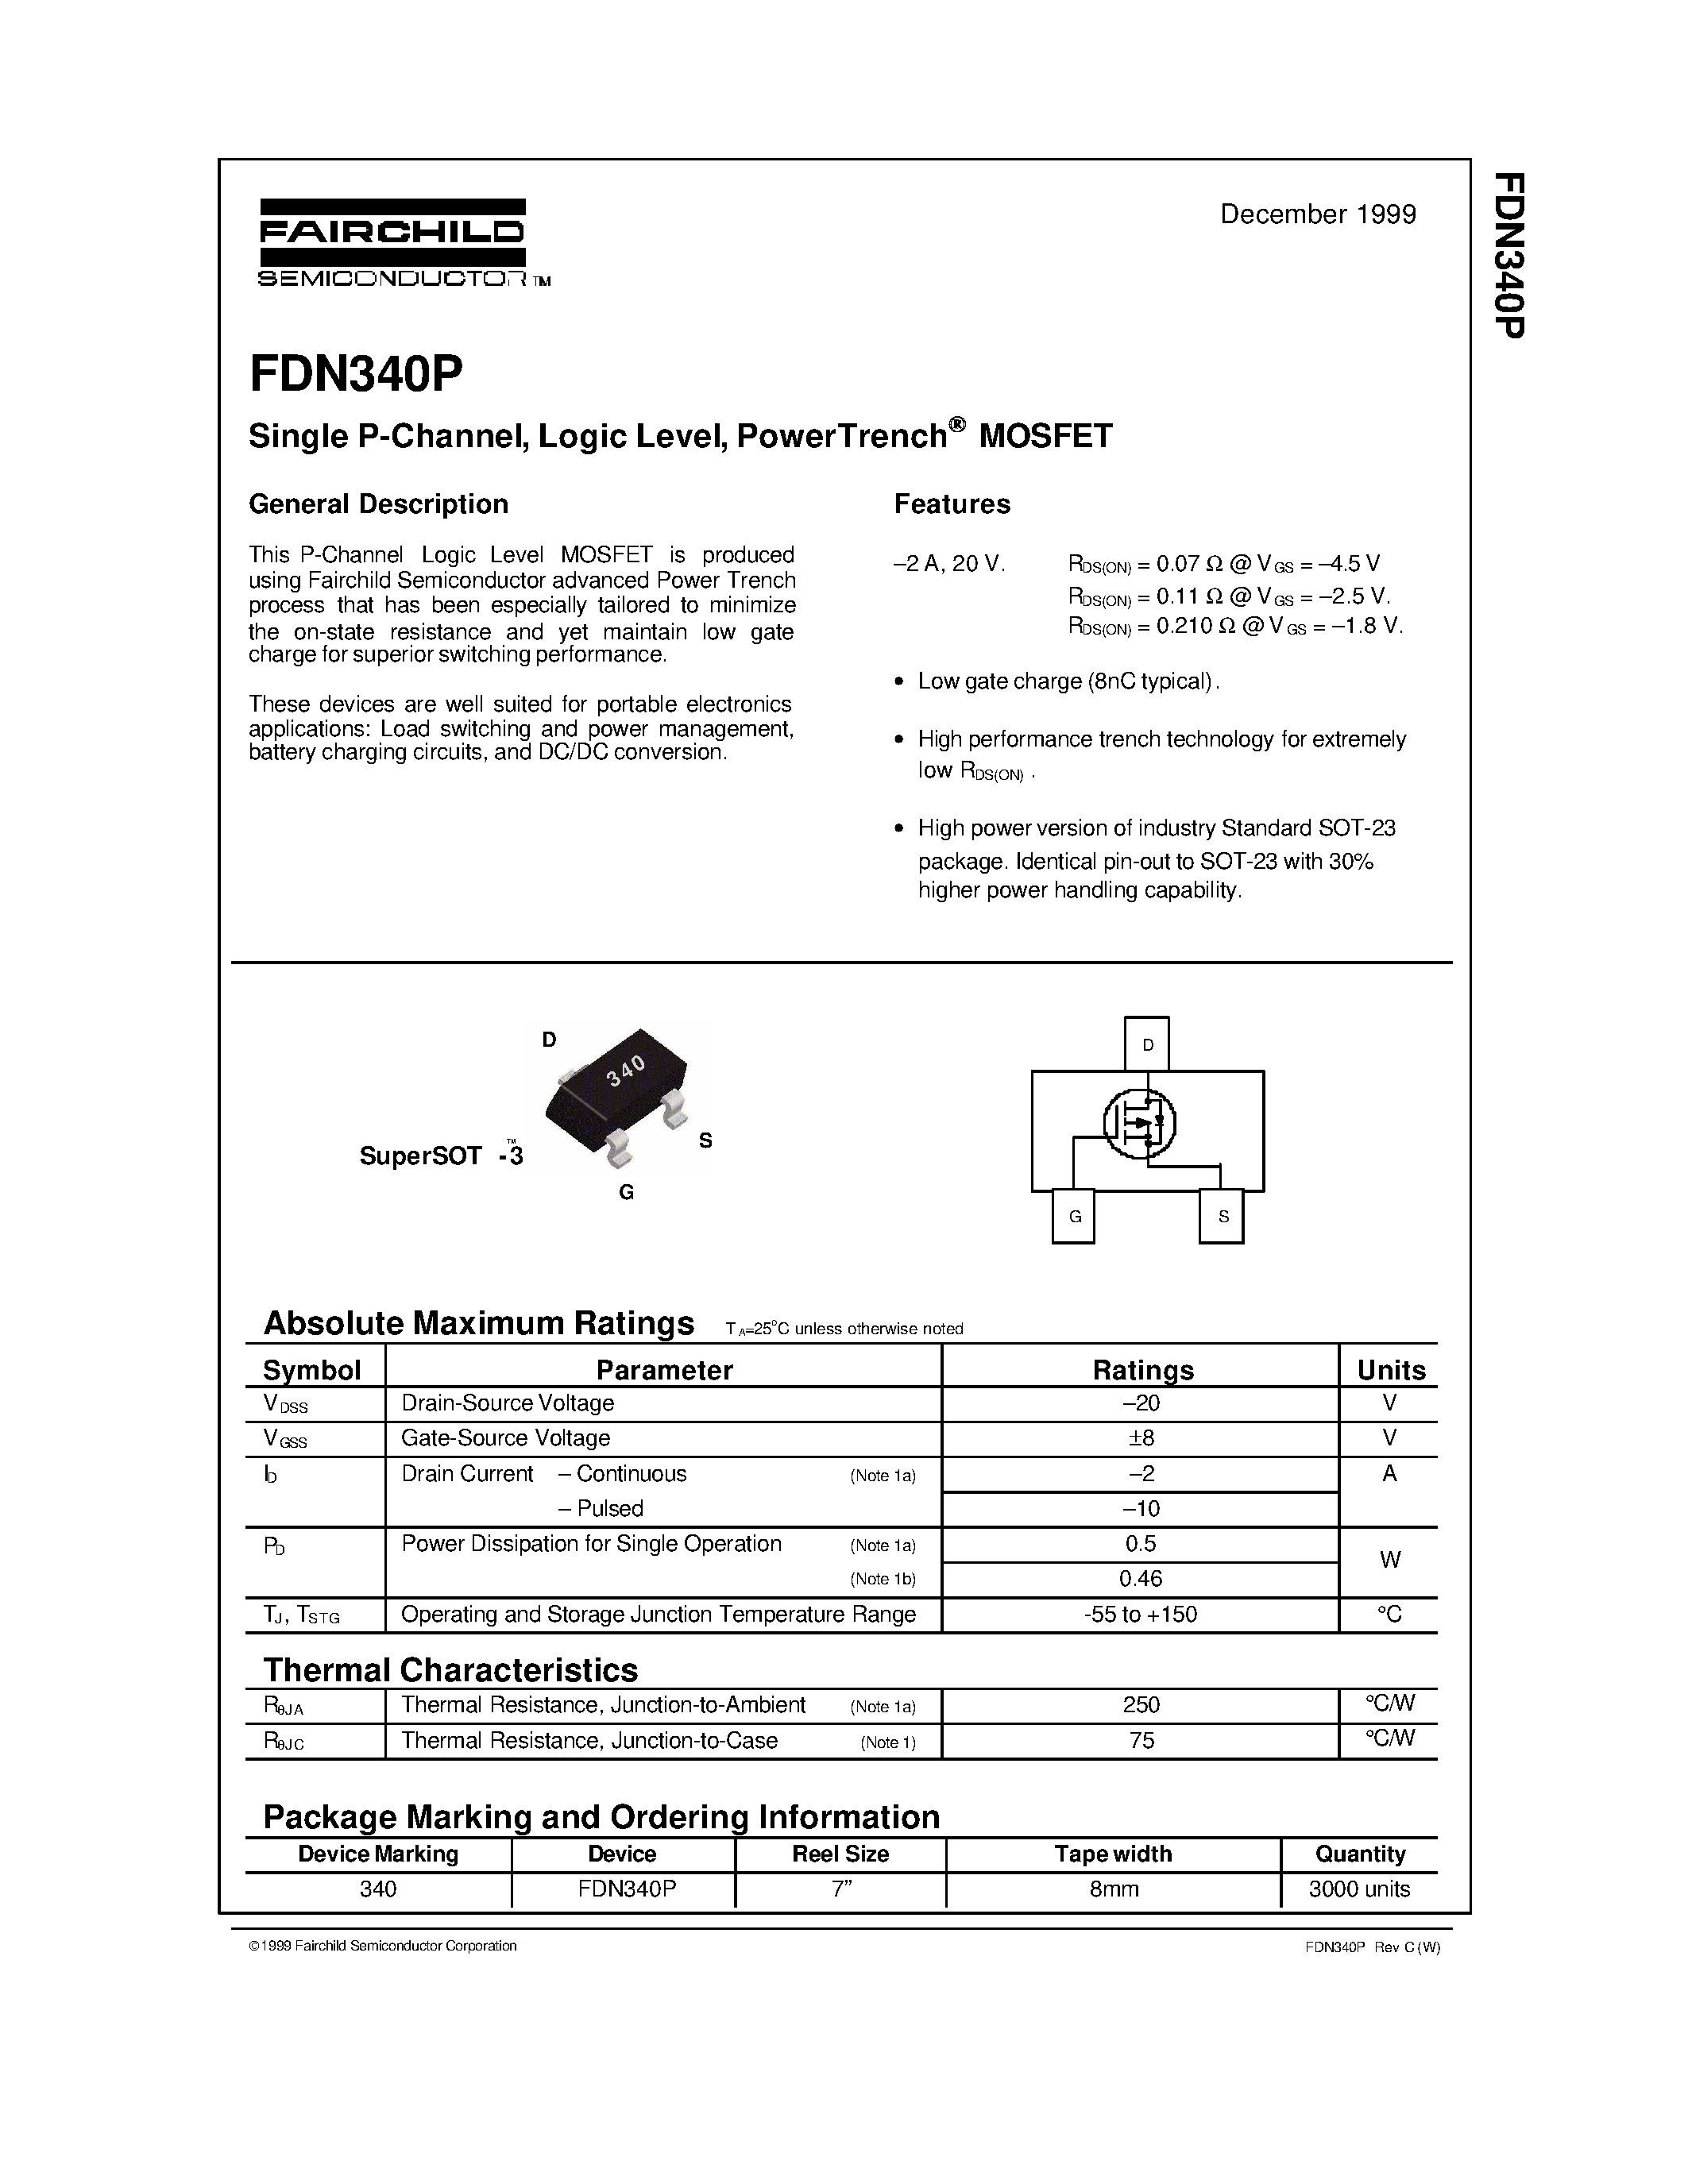 Даташит FDN340 - Single P-Channel/ Logic Level/ PowerTrench MOSFET страница 1